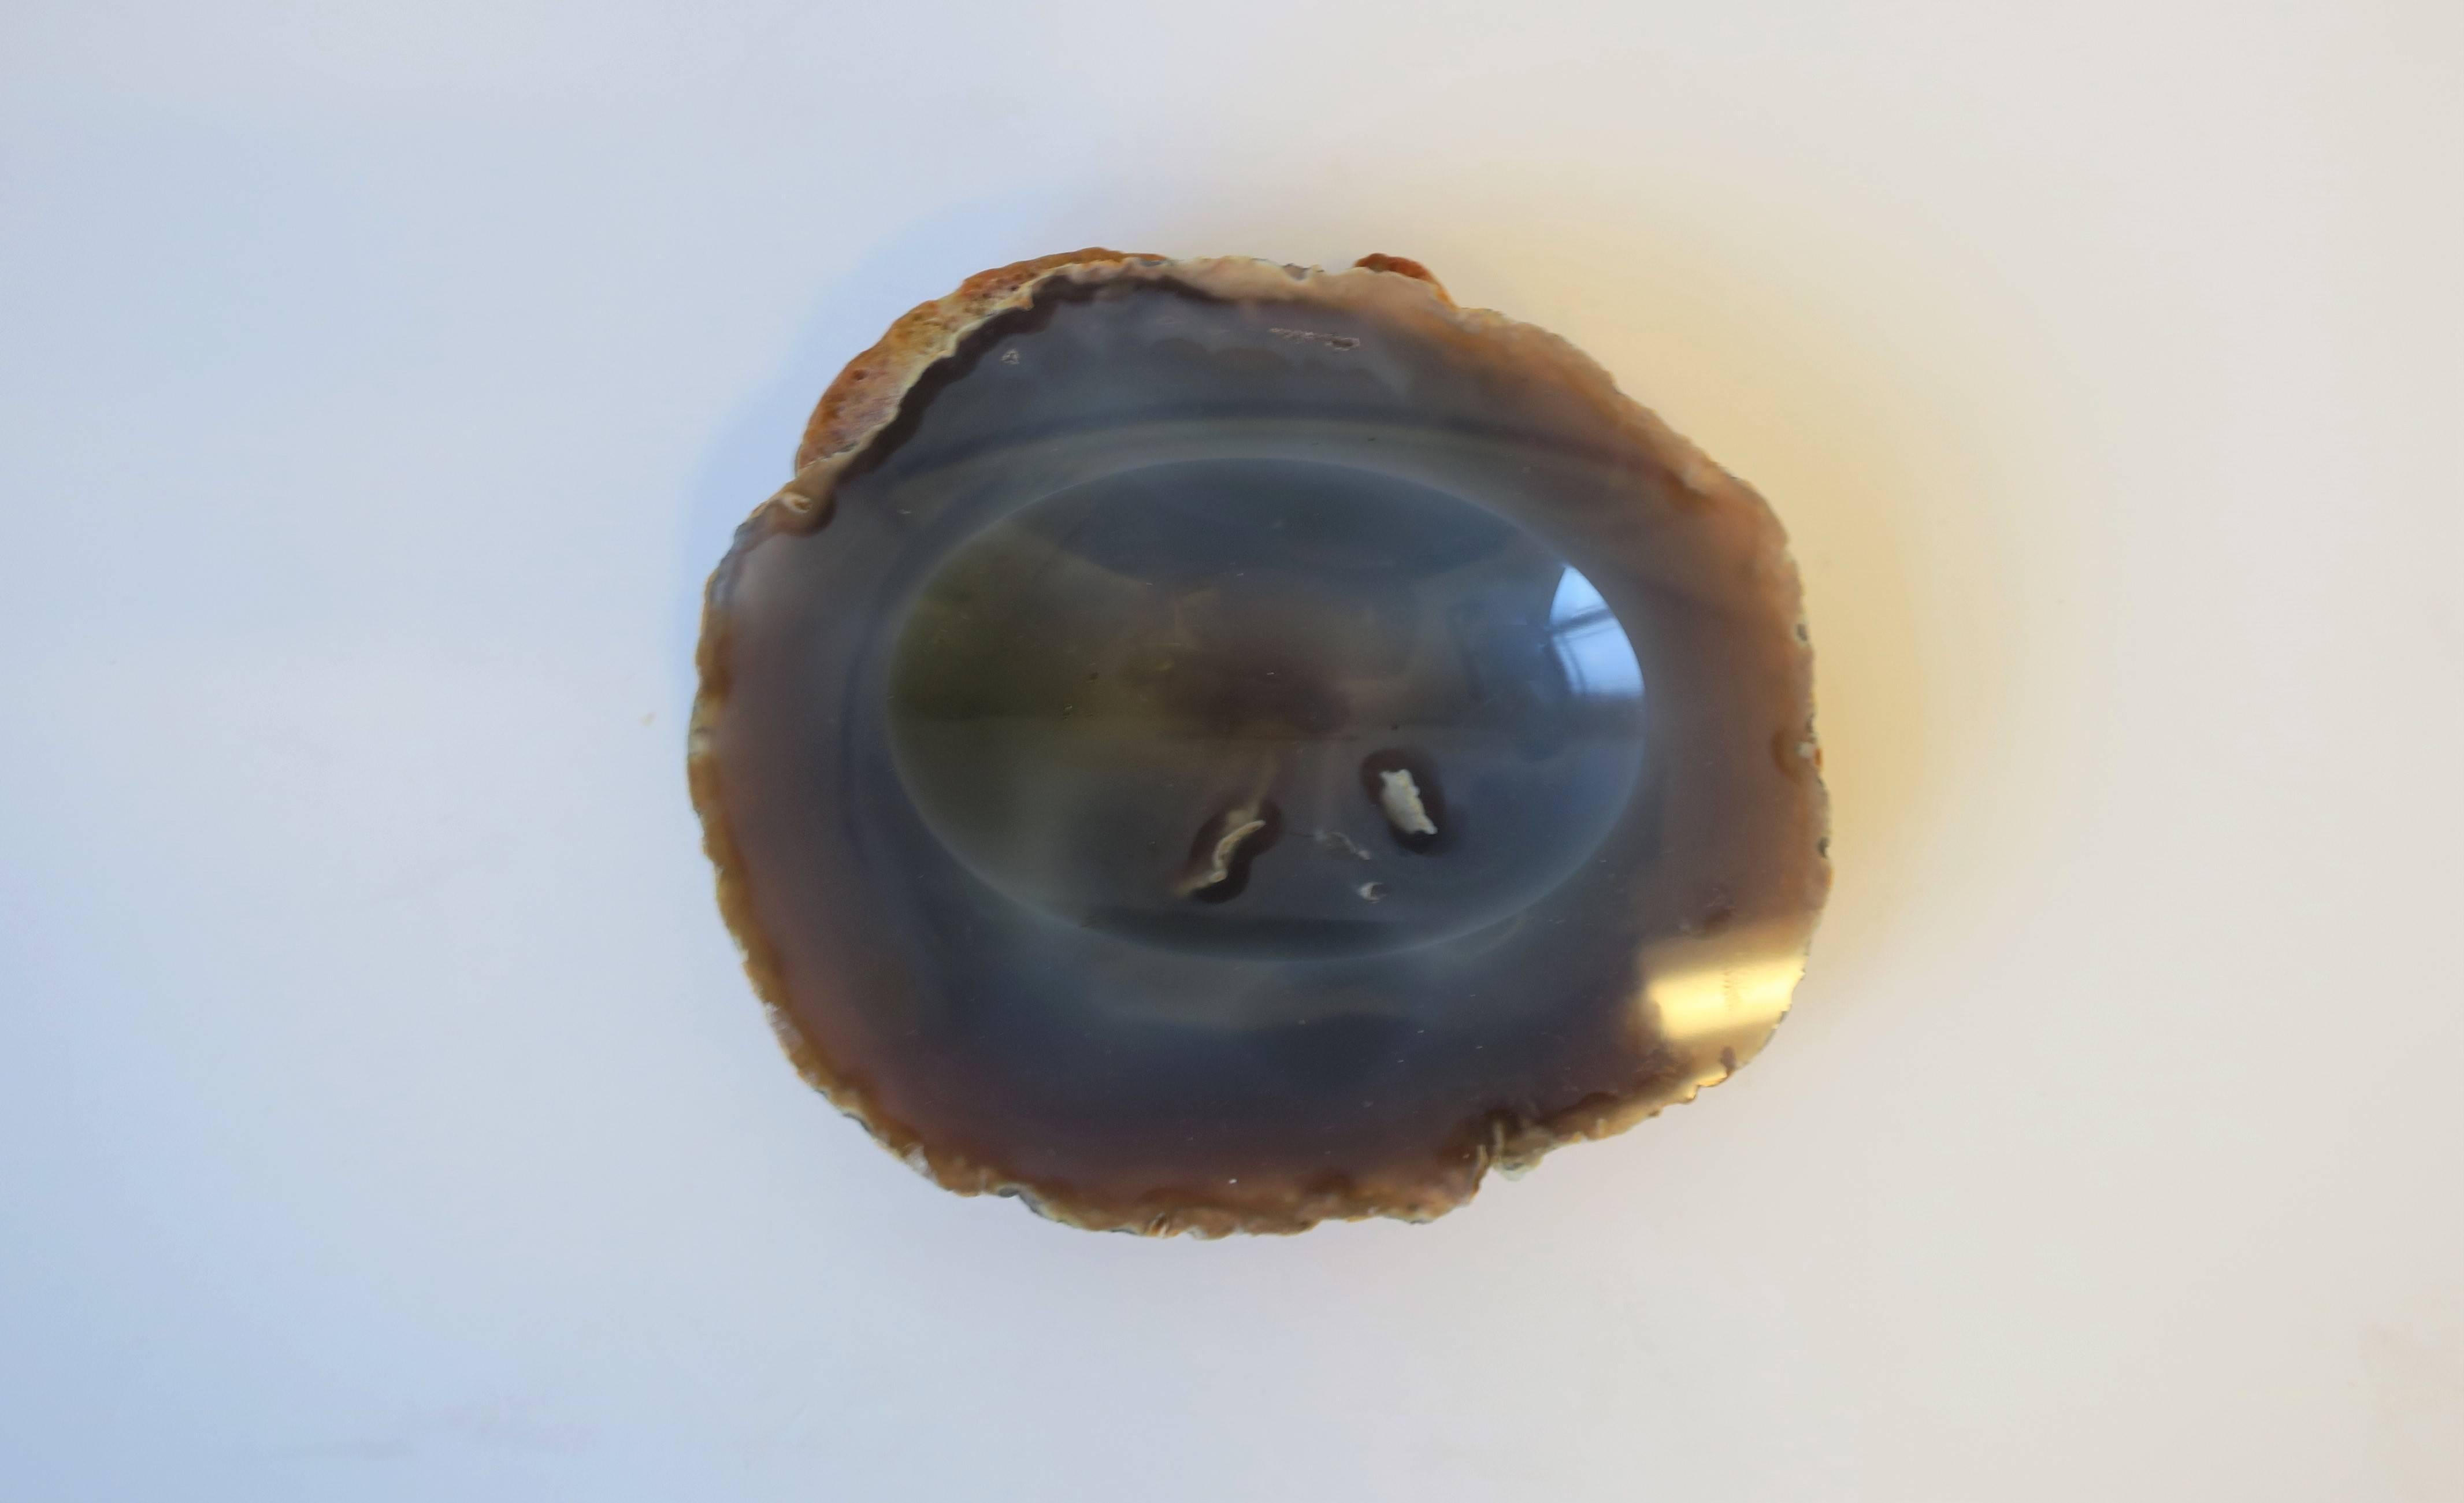 A beautiful blue grey agate onyx vessel, Organic Modern, circa 20th century. Piece can work as a small jewelry dish, a standalone decorative piece, or paperweight/desk accessory for small items, etc. Elegant and convenient for a table, desk, shelf.